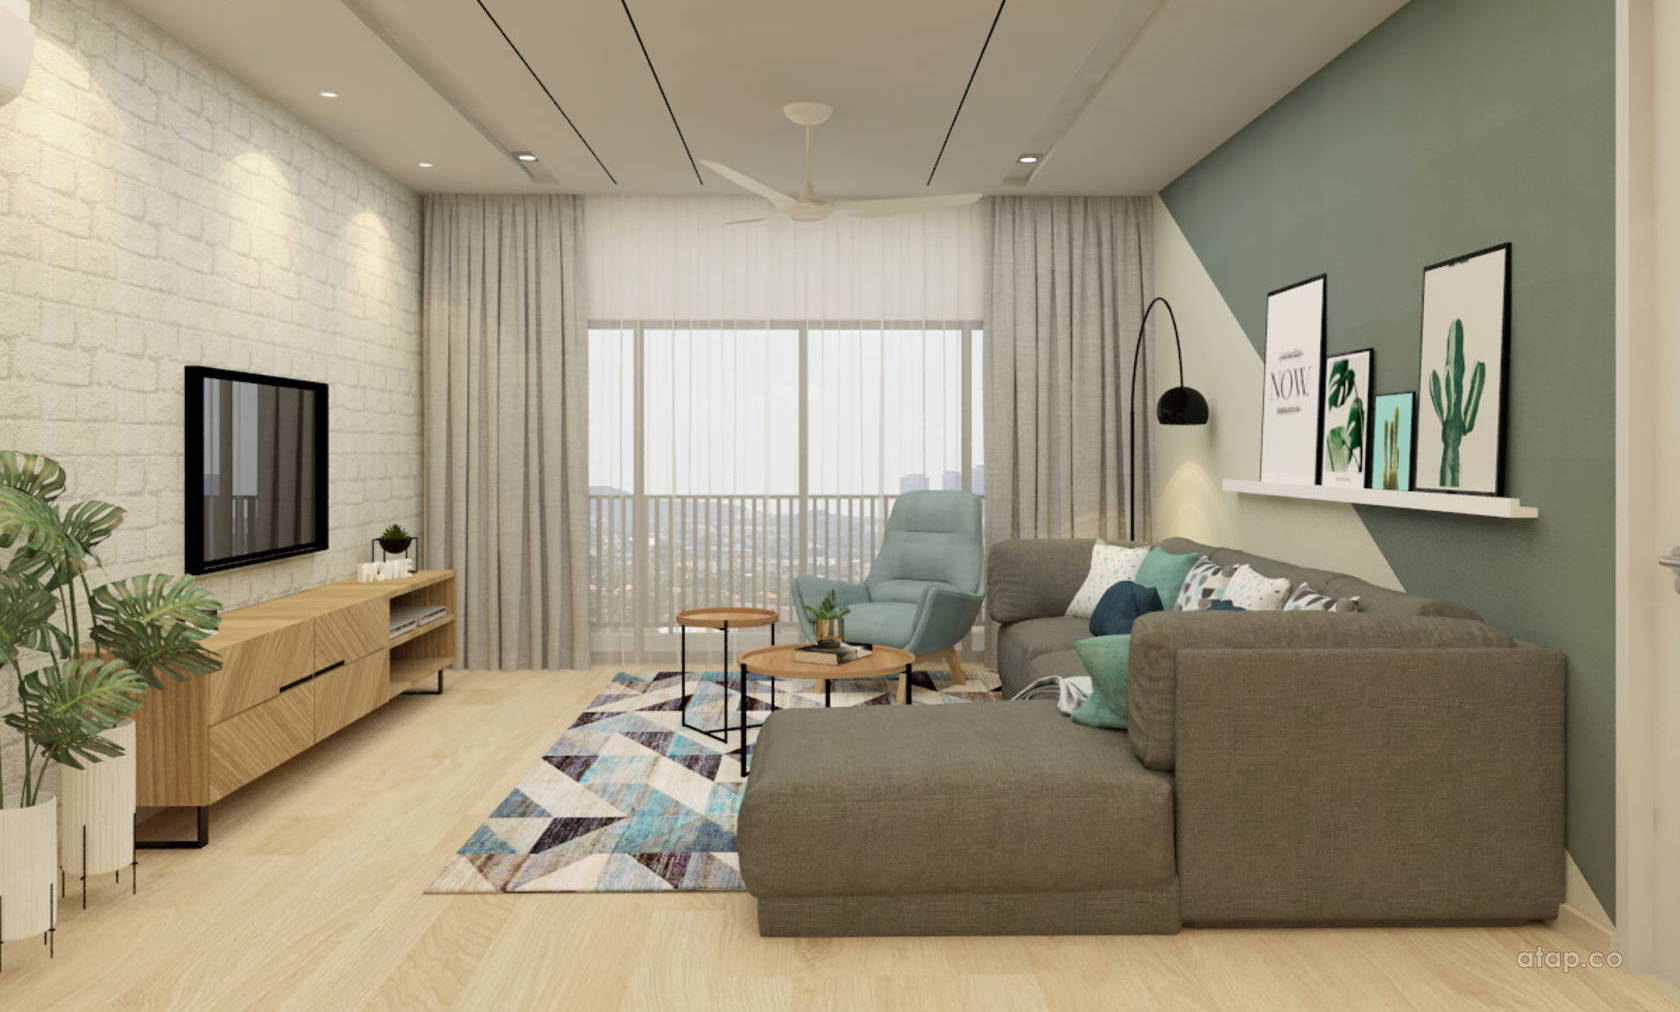 4-room HDB living room of a modern mix Scandinavian style infused with Industrial essence